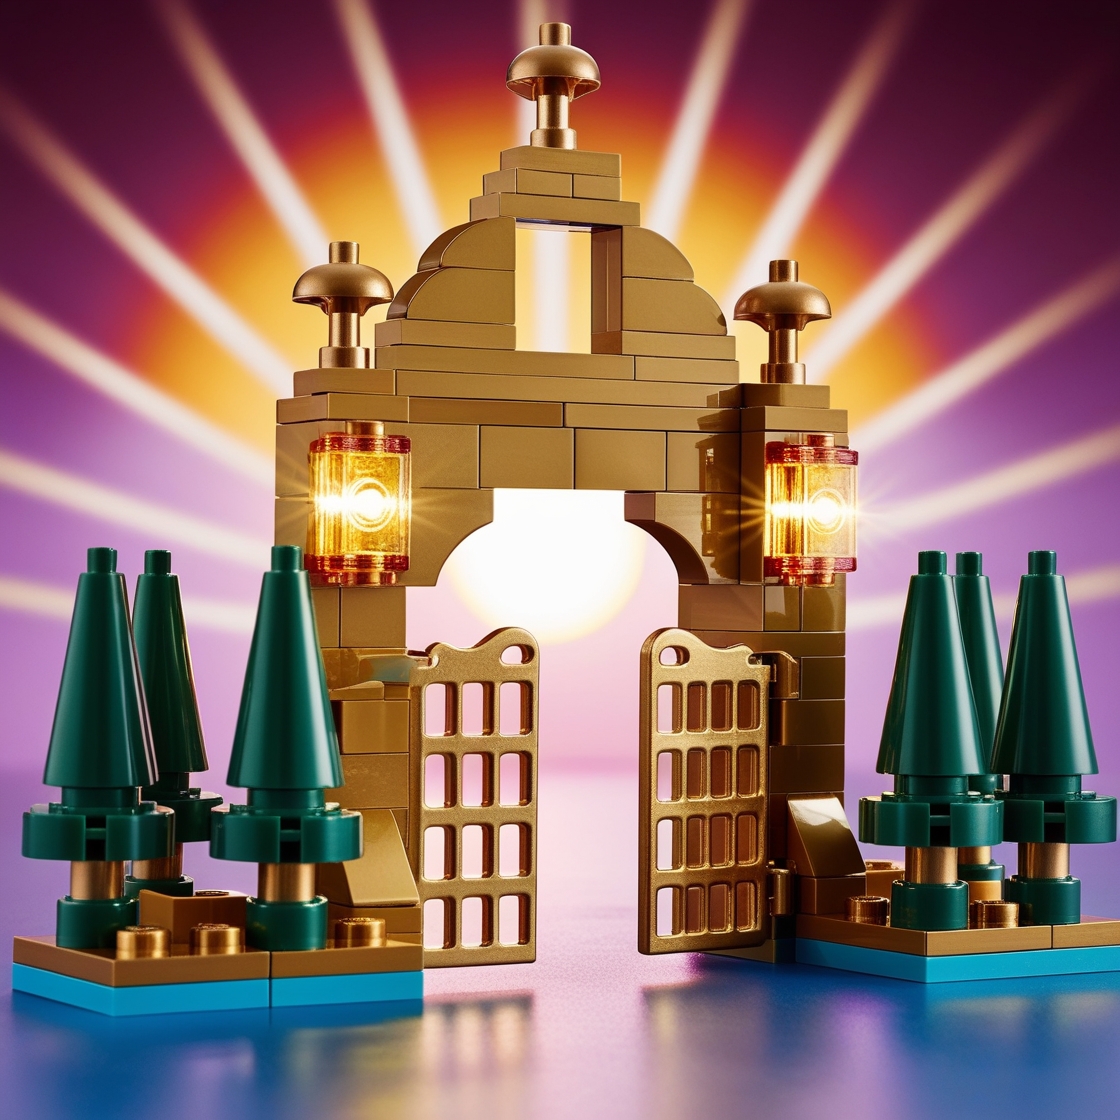 Default_Create_this_gate_from_Lego_pieces_made_of_gold_make_an_3.jpg